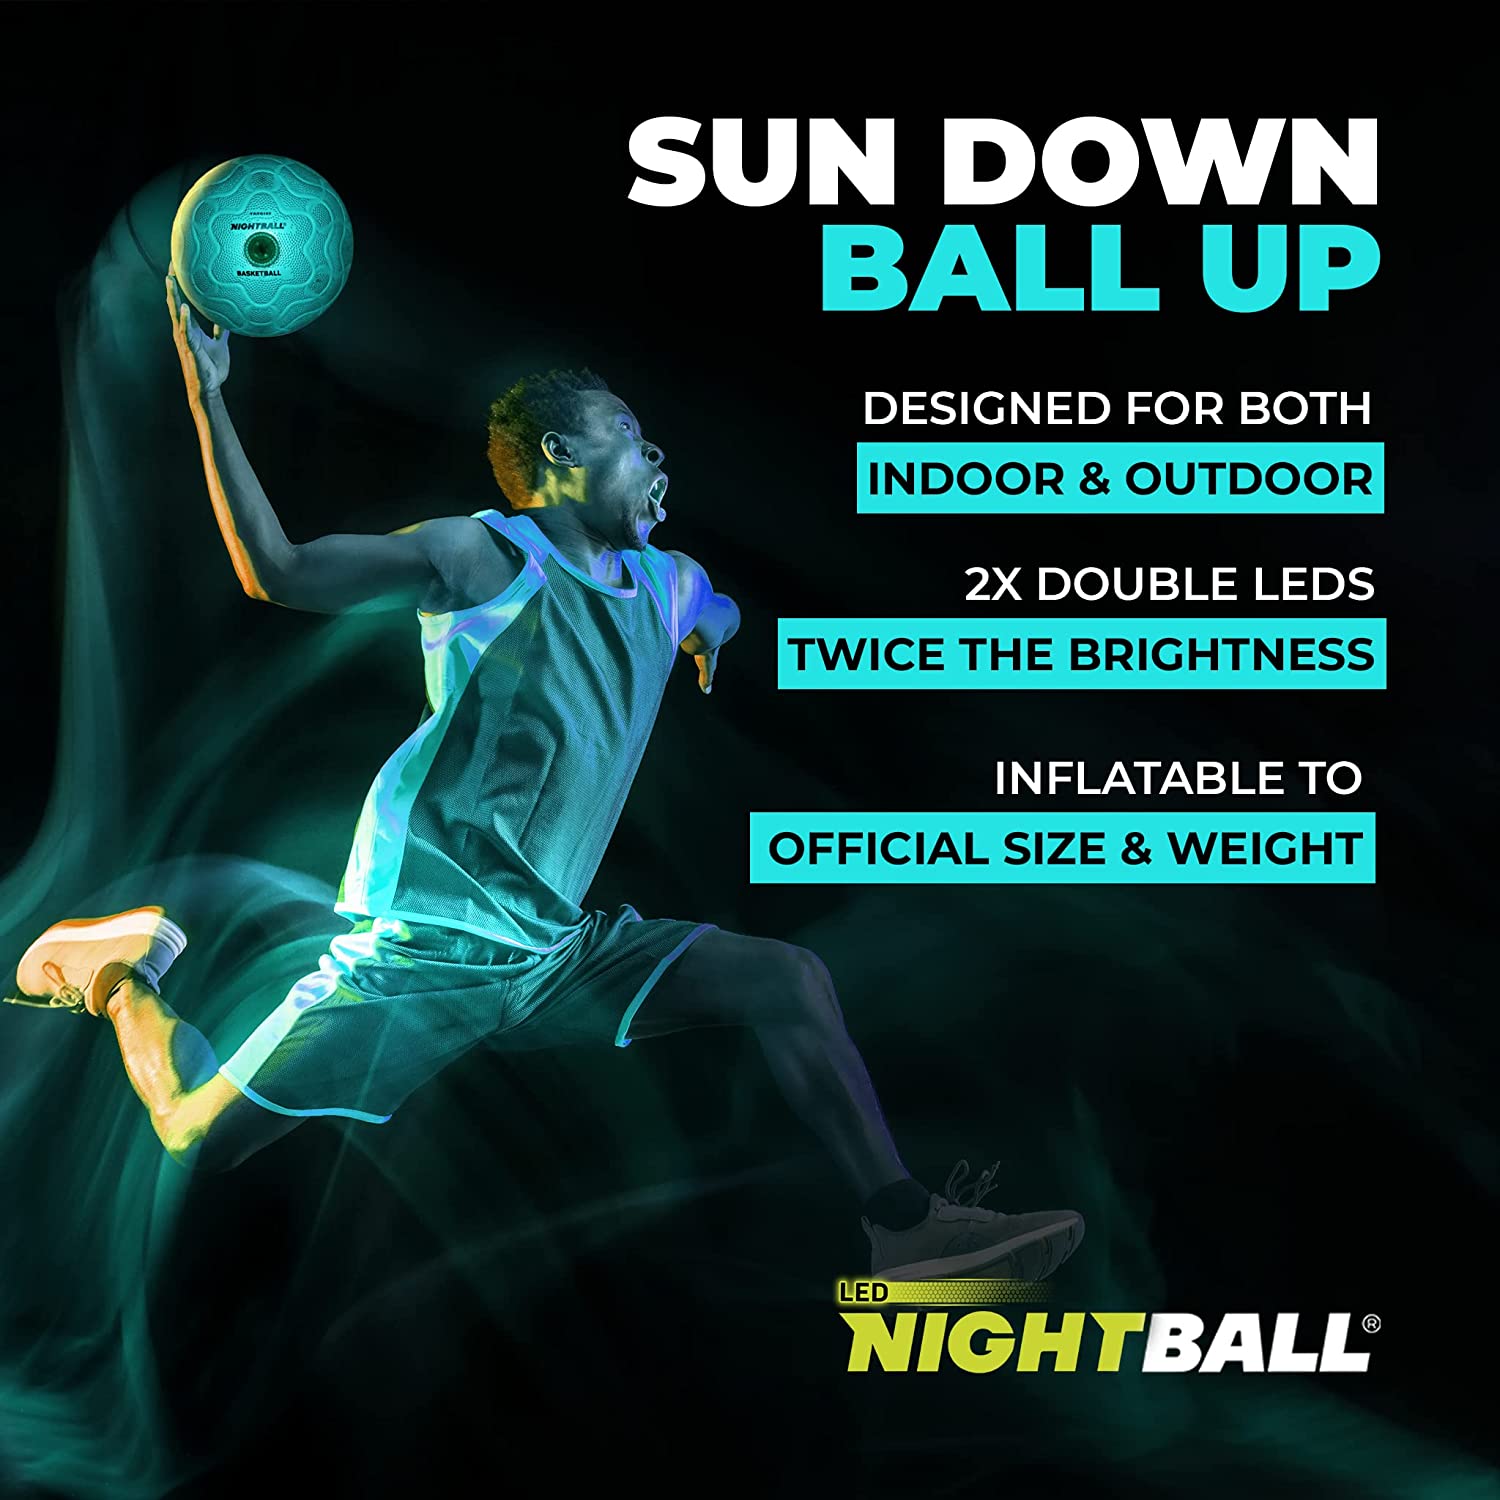 Tangle-Nightball Glow in the Dark Light Up Basketball Teal-12776-Legacy Toys